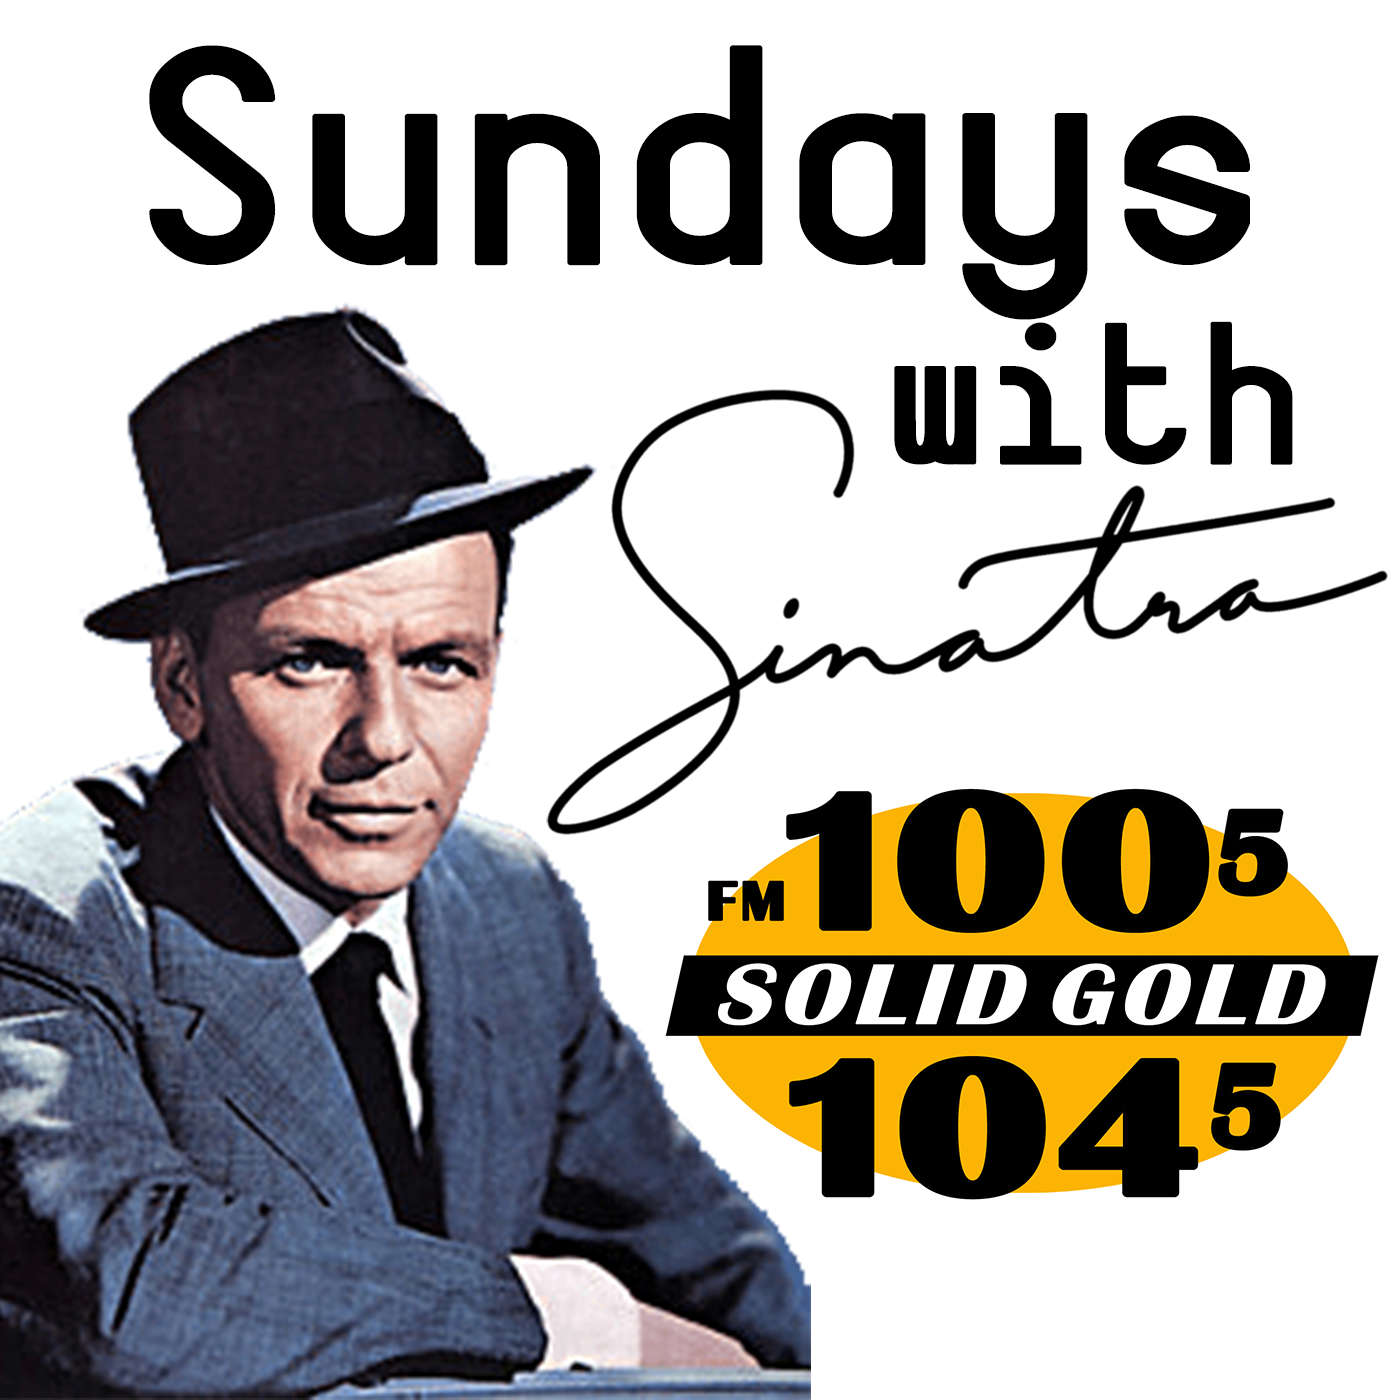 Sundays with Sinatra by Don Giovanni on SolidGold 100.5/104.5